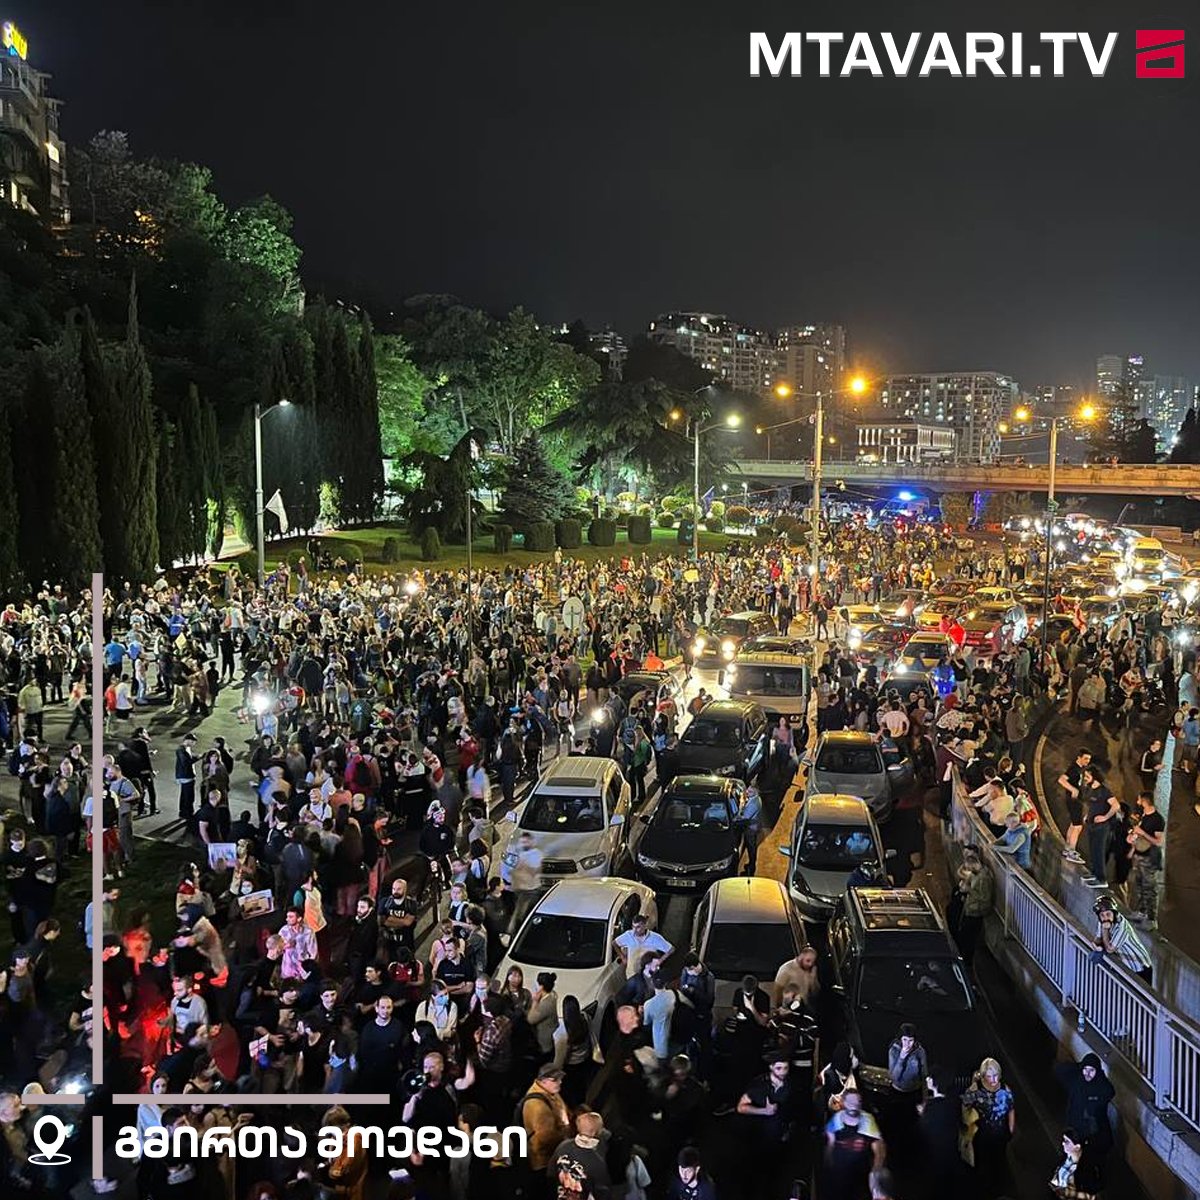 After the arrest of the peaceful protesters on the main road of #Tbilisi, the demonstrators gathered in front of the Parliament marched to help them. This is what Heroes' Square looks like now, the main transport hub of the capital. #Georgia #GeorgiaProtests #NoToRussianLaw